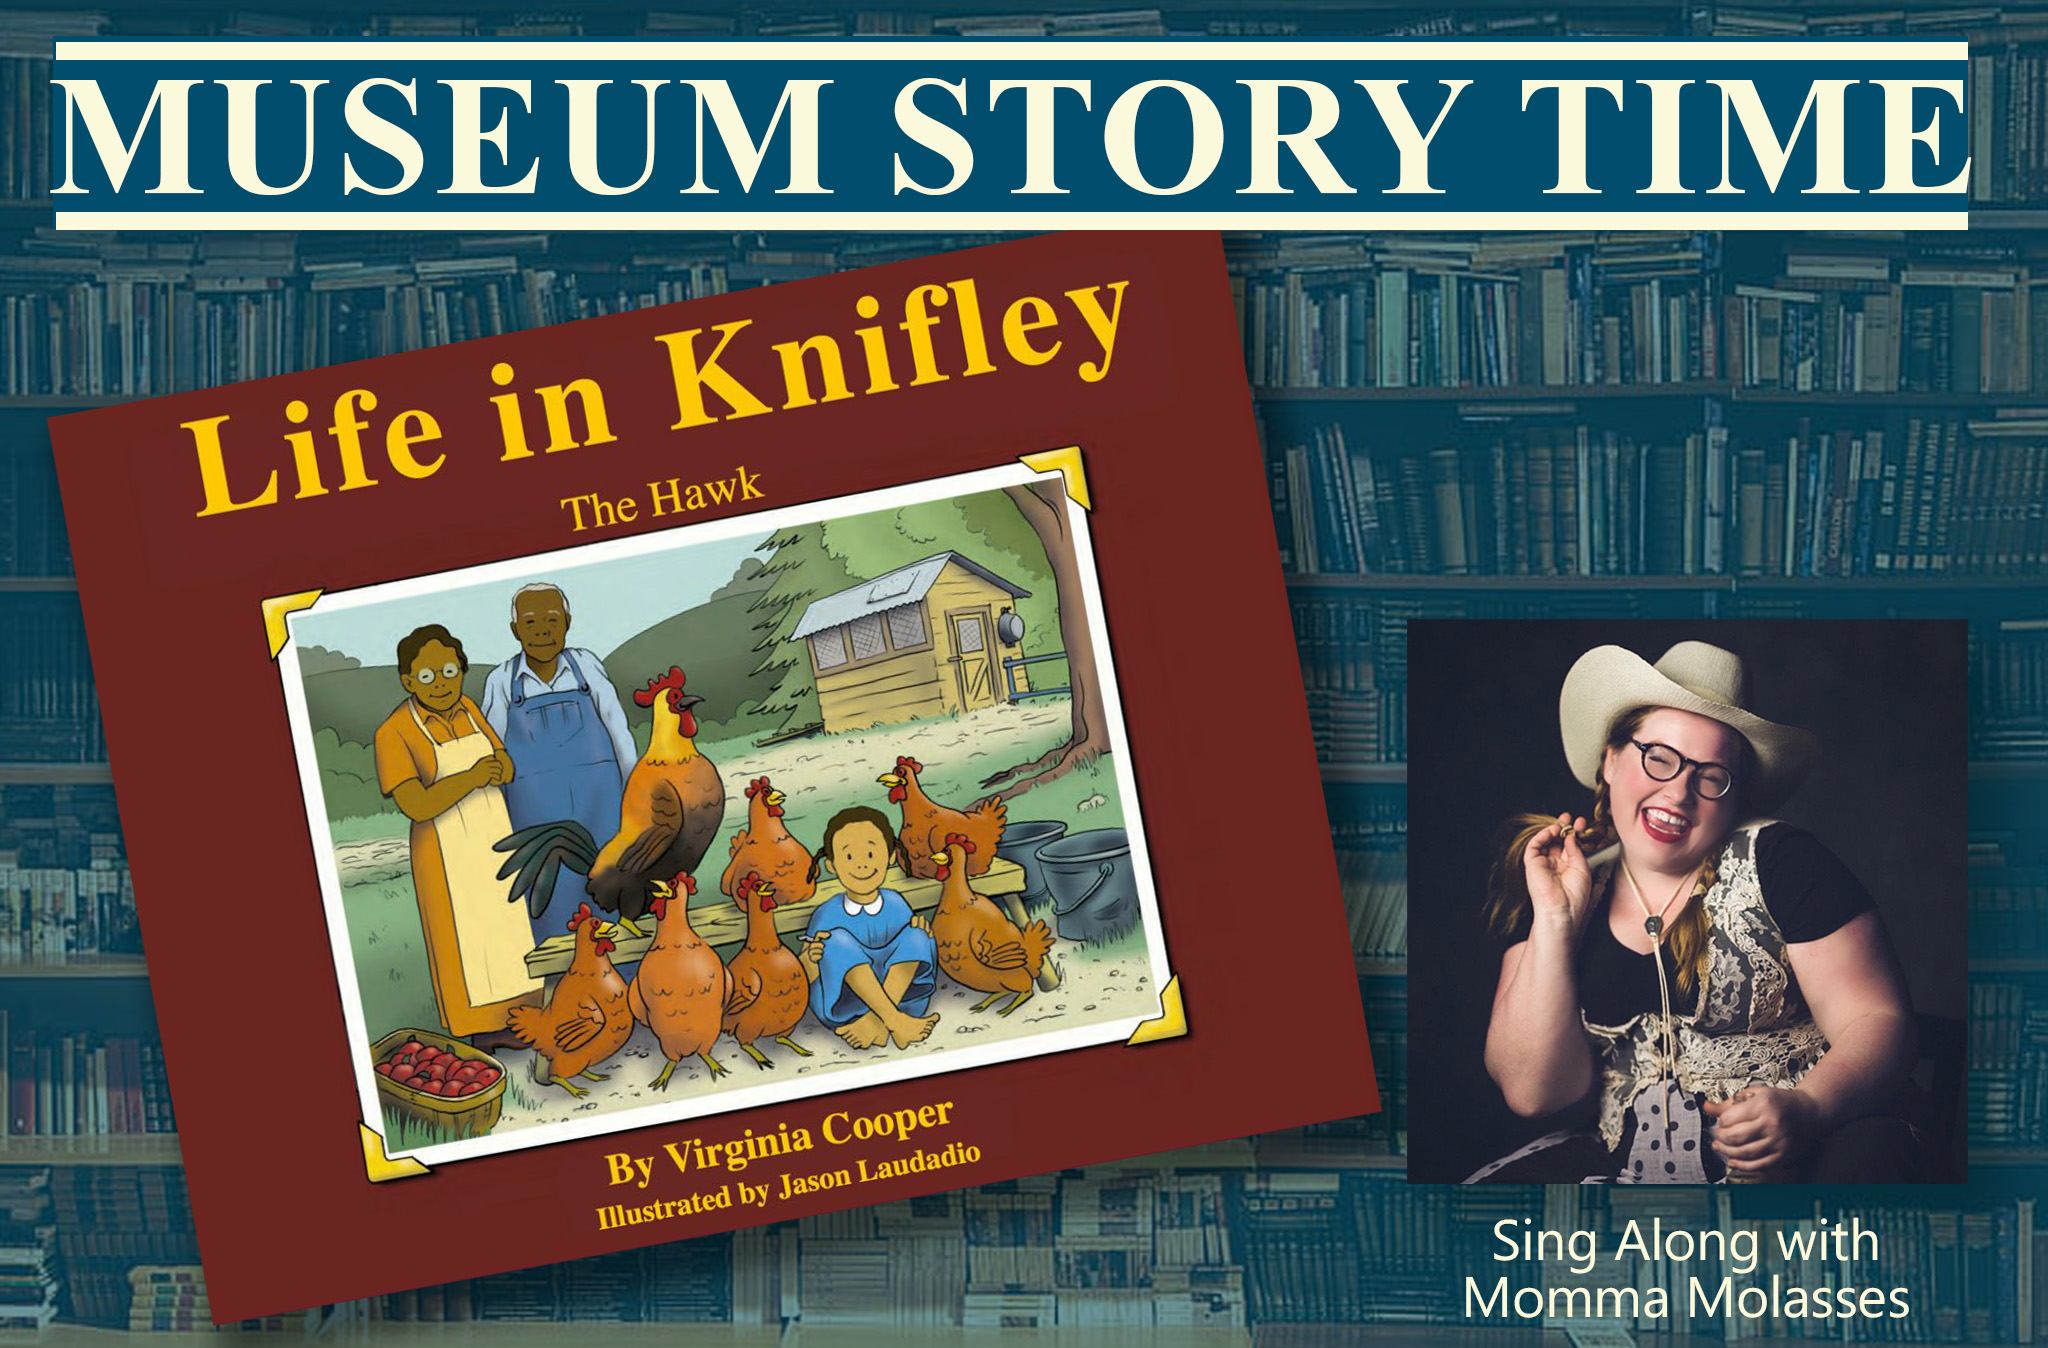 Museum Story Time – Life in Knifely: The Hawk by Virginia Cooper